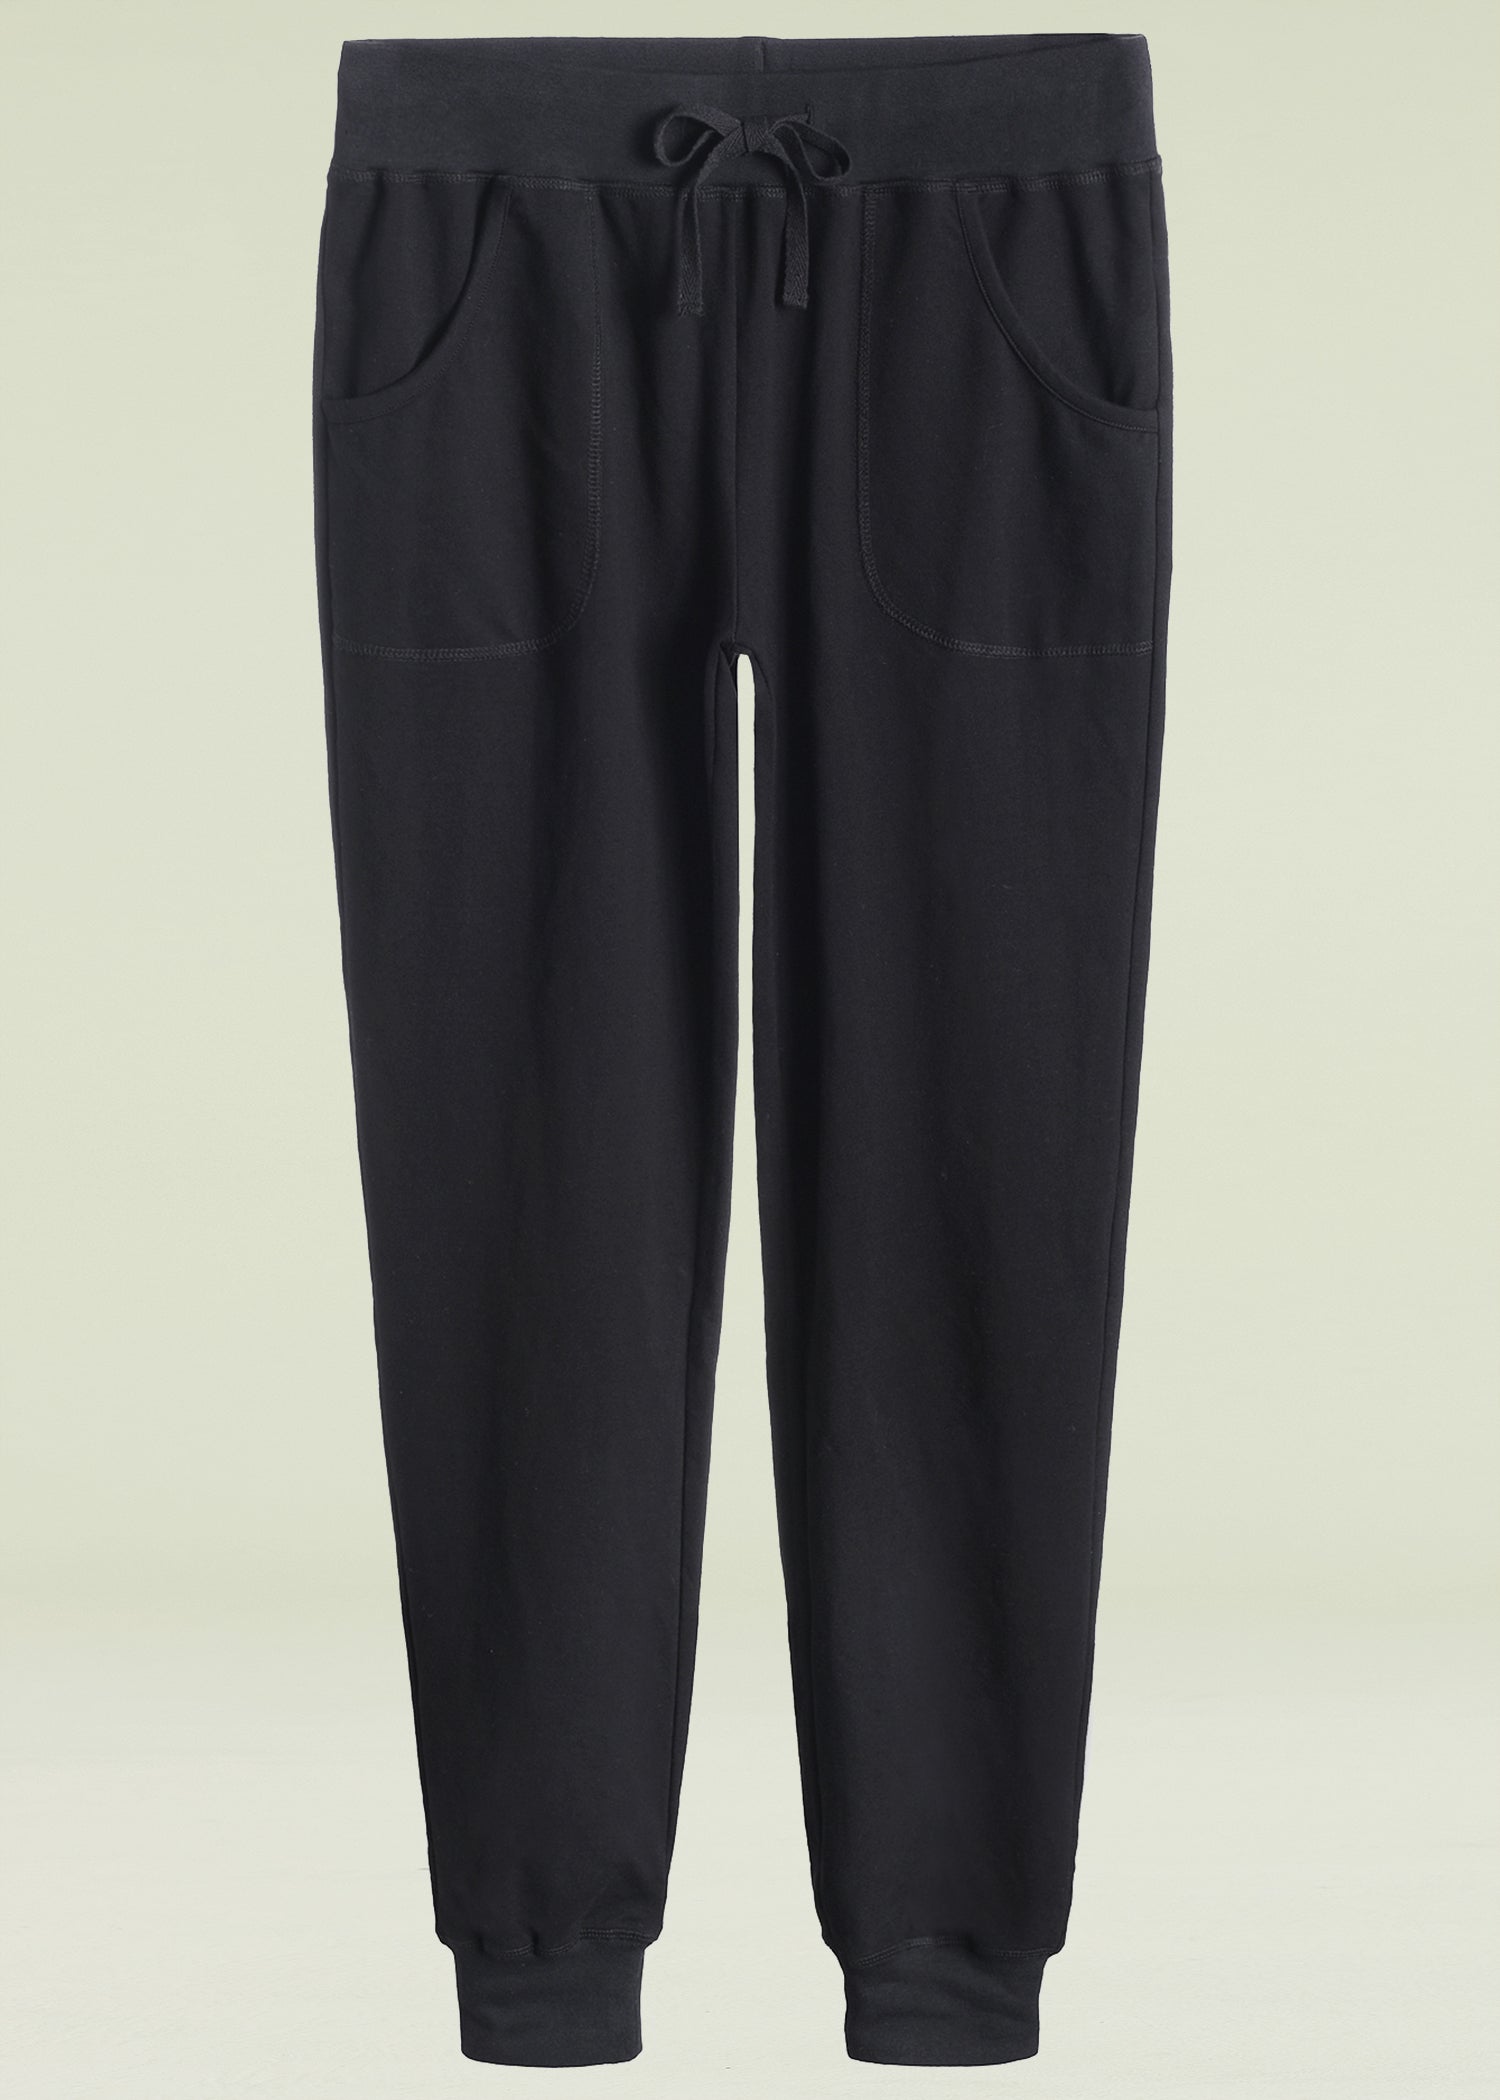 Women's Cotton Joggers Jersey Sweatpants with Pockets